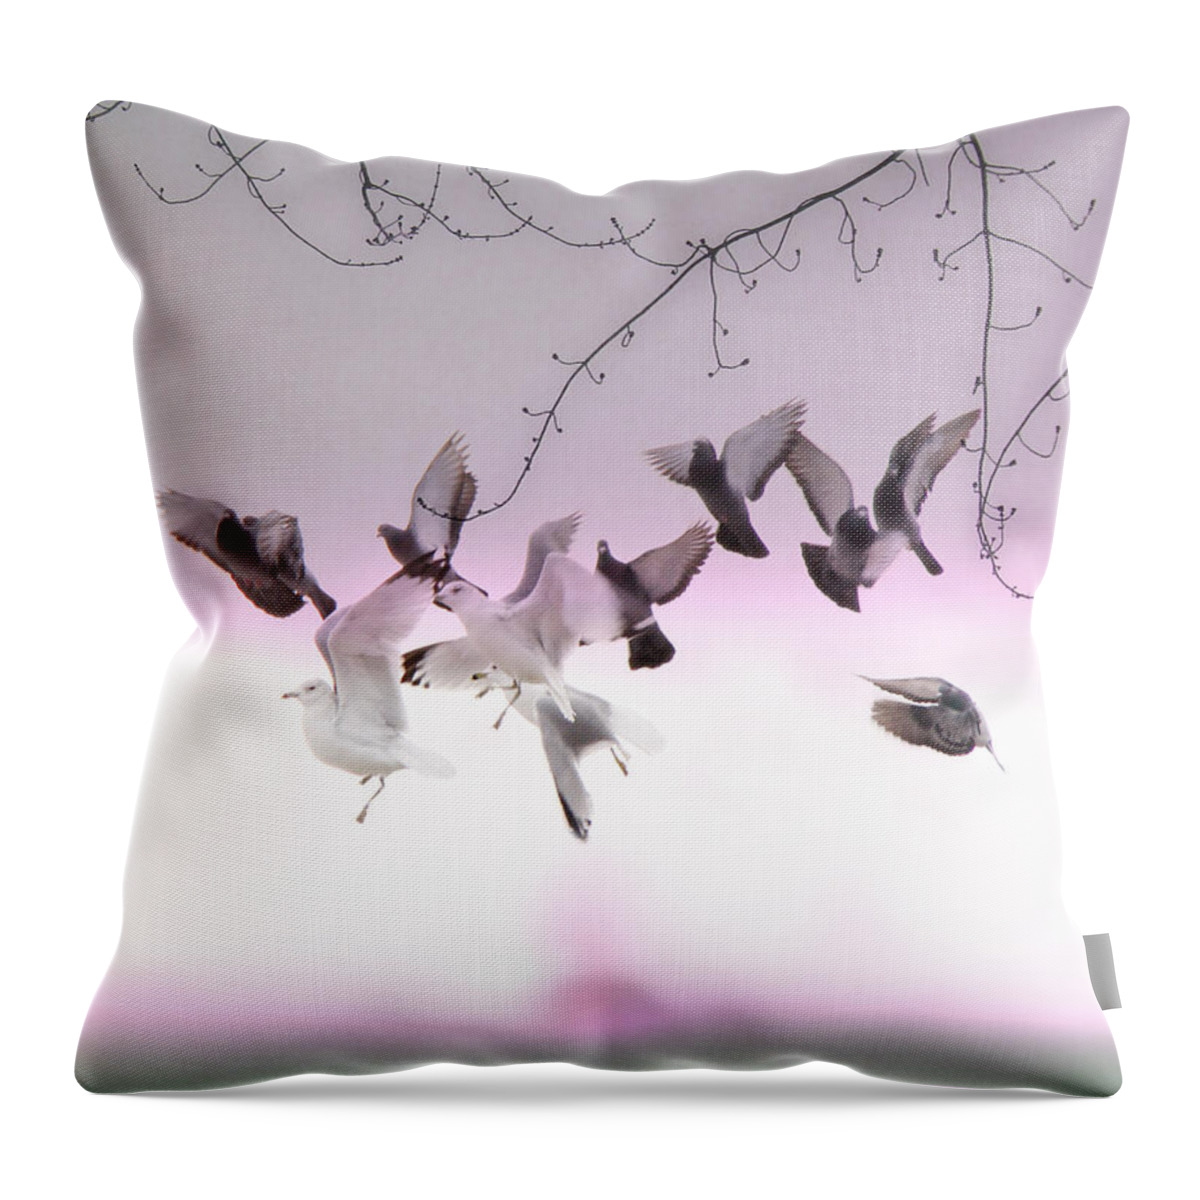 Pigeons Throw Pillow featuring the photograph Feather Light by Gothicrow Images